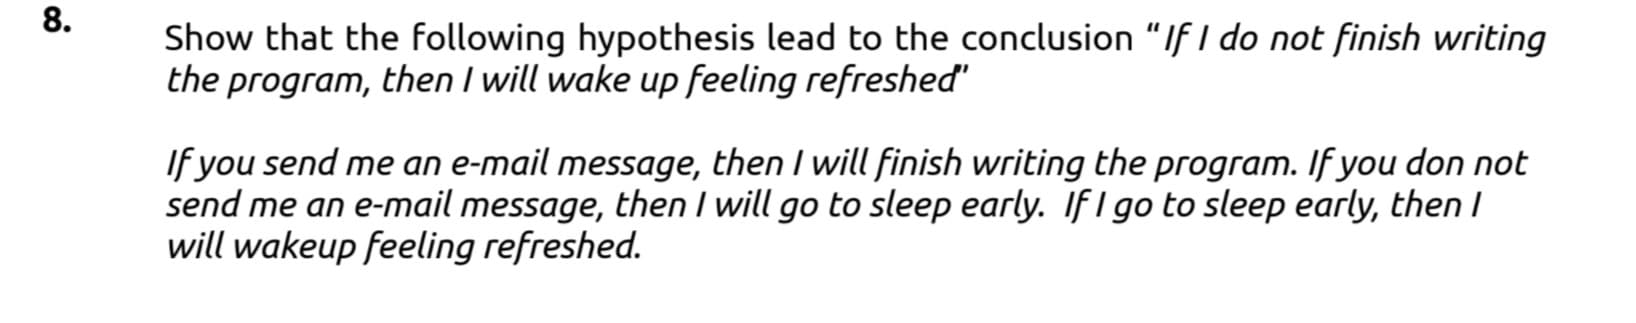 8.
Show that the following hypothesis lead to the conclusion "If I do not finish writing
the program, then I will wake up feeling refreshed'
If you send me an e-mail message, then I will finish writing the program. If you don not
send me an e-mail message, then I will go to sleep early. If I go to sleep early, then /
will wakeup feeling refreshed.
